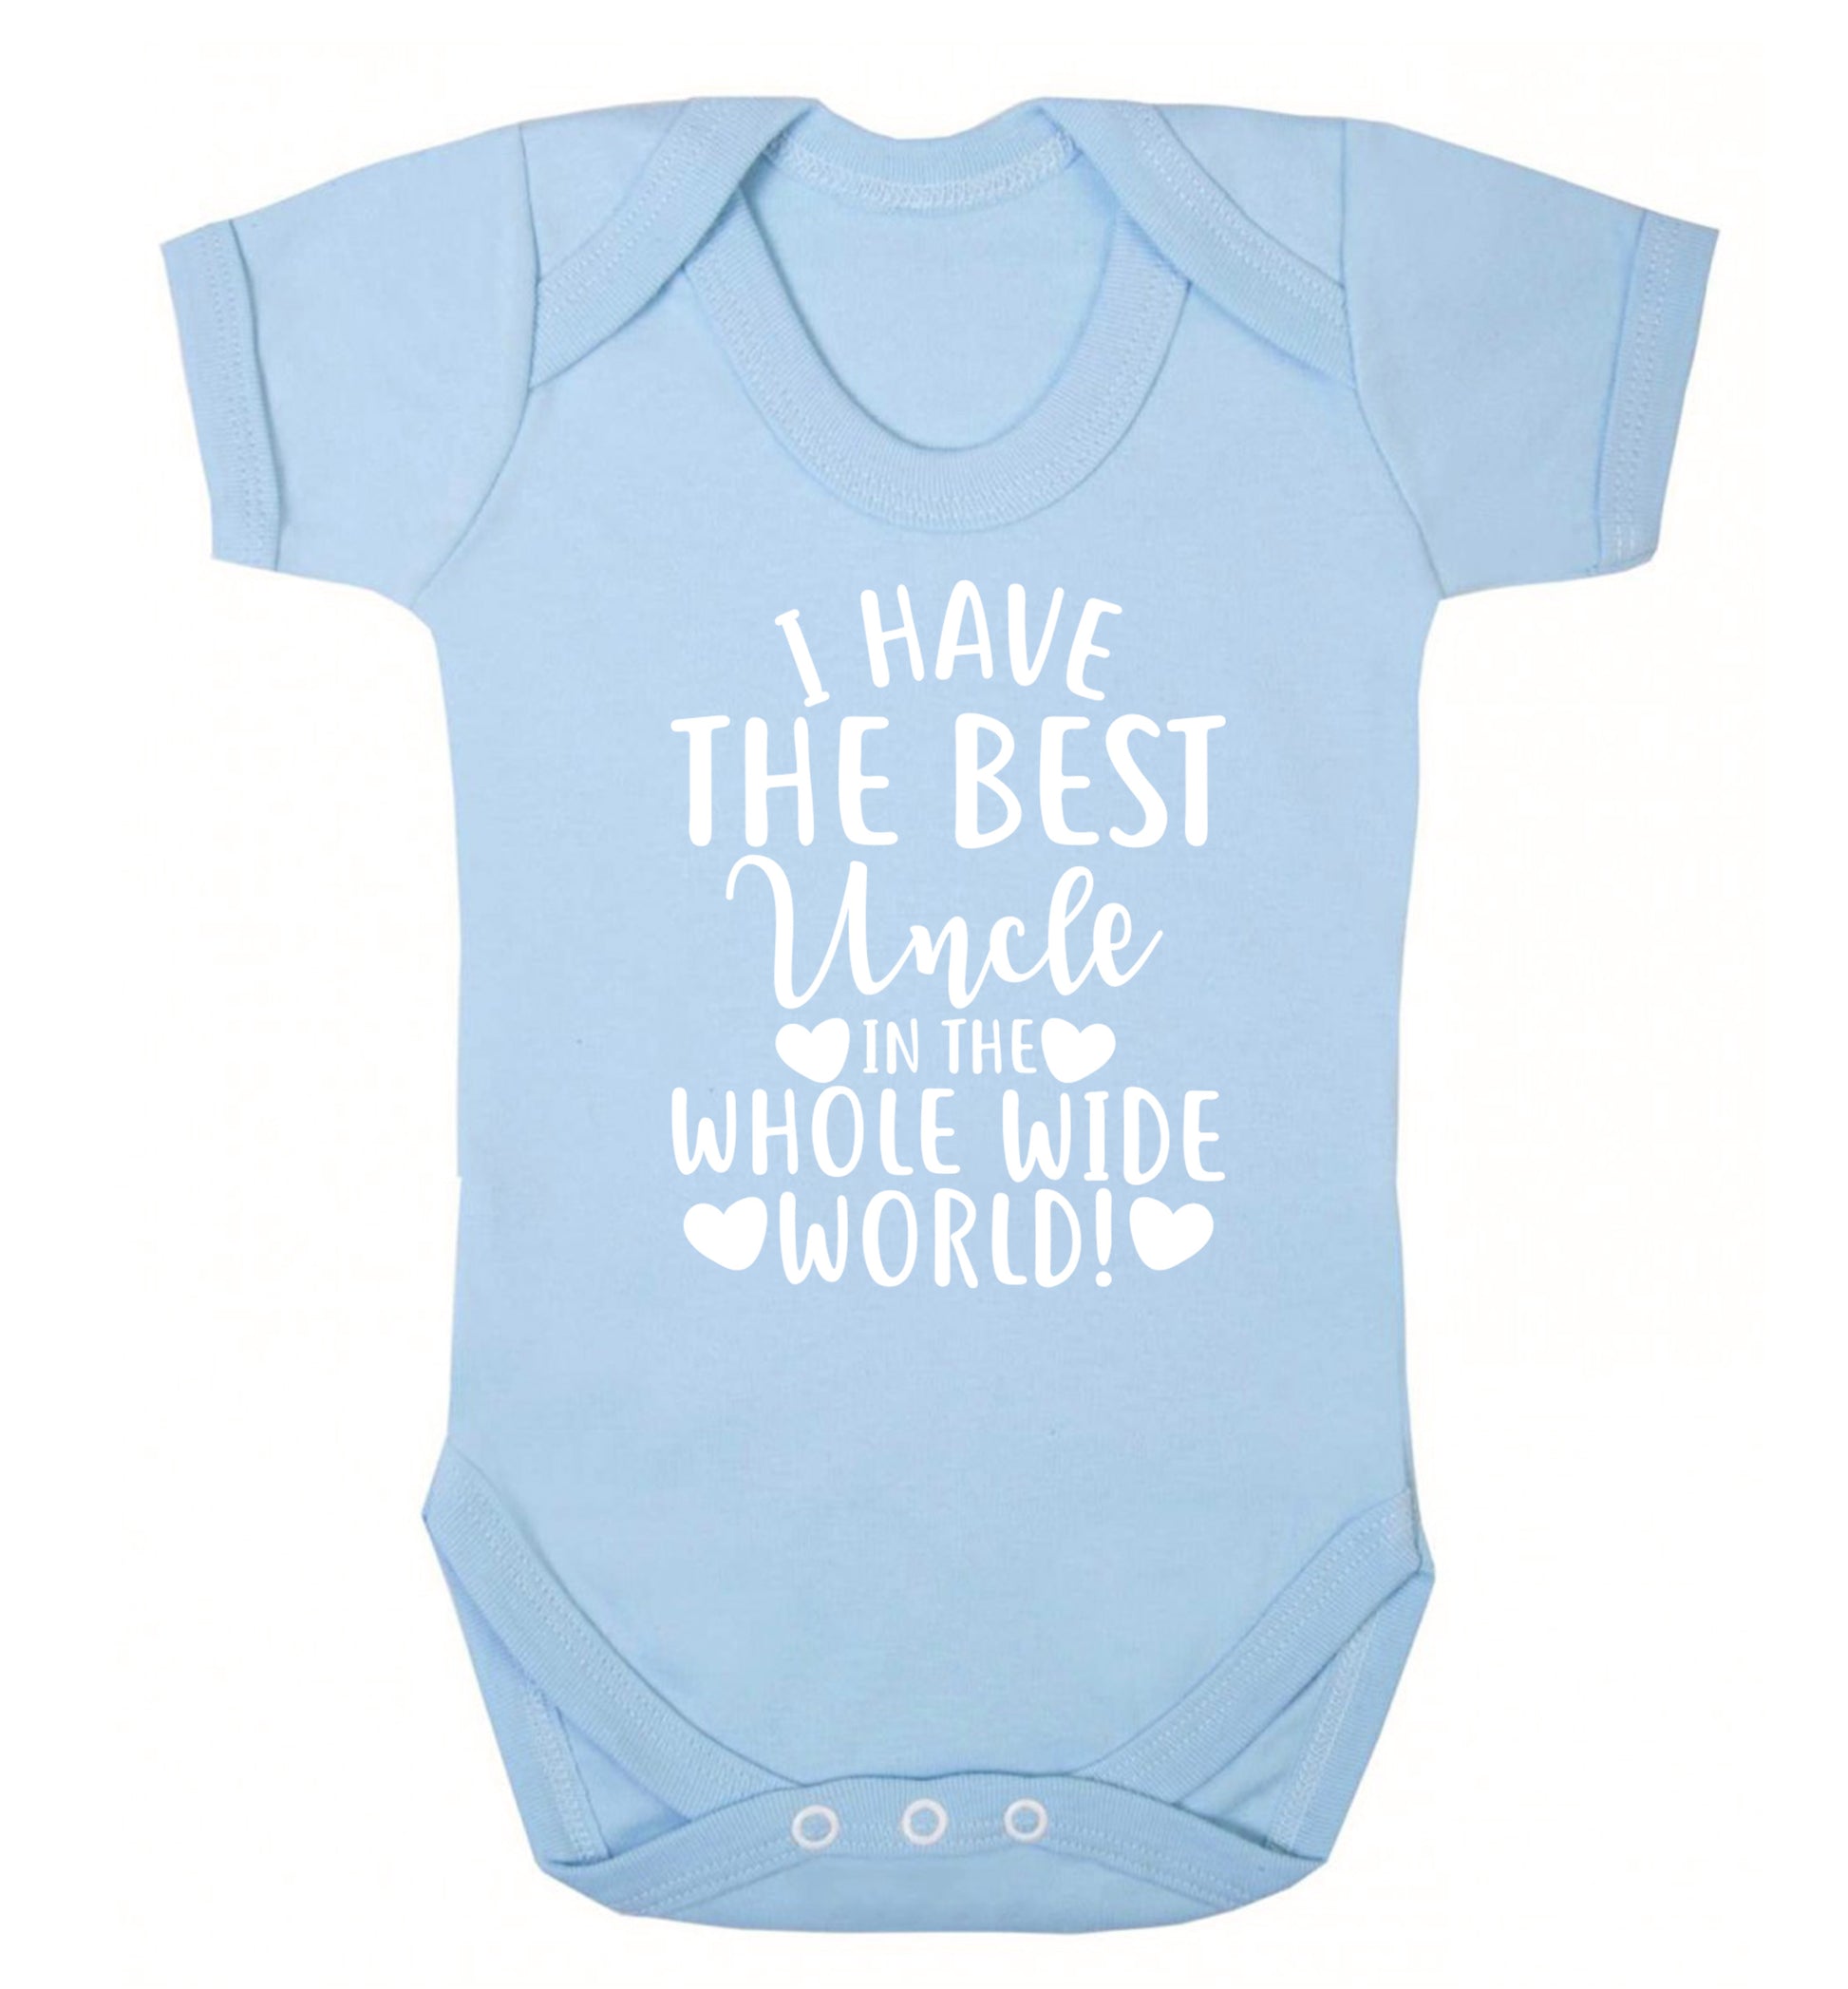 I have the best uncle in the whole wide world! Baby Vest pale blue 18-24 months